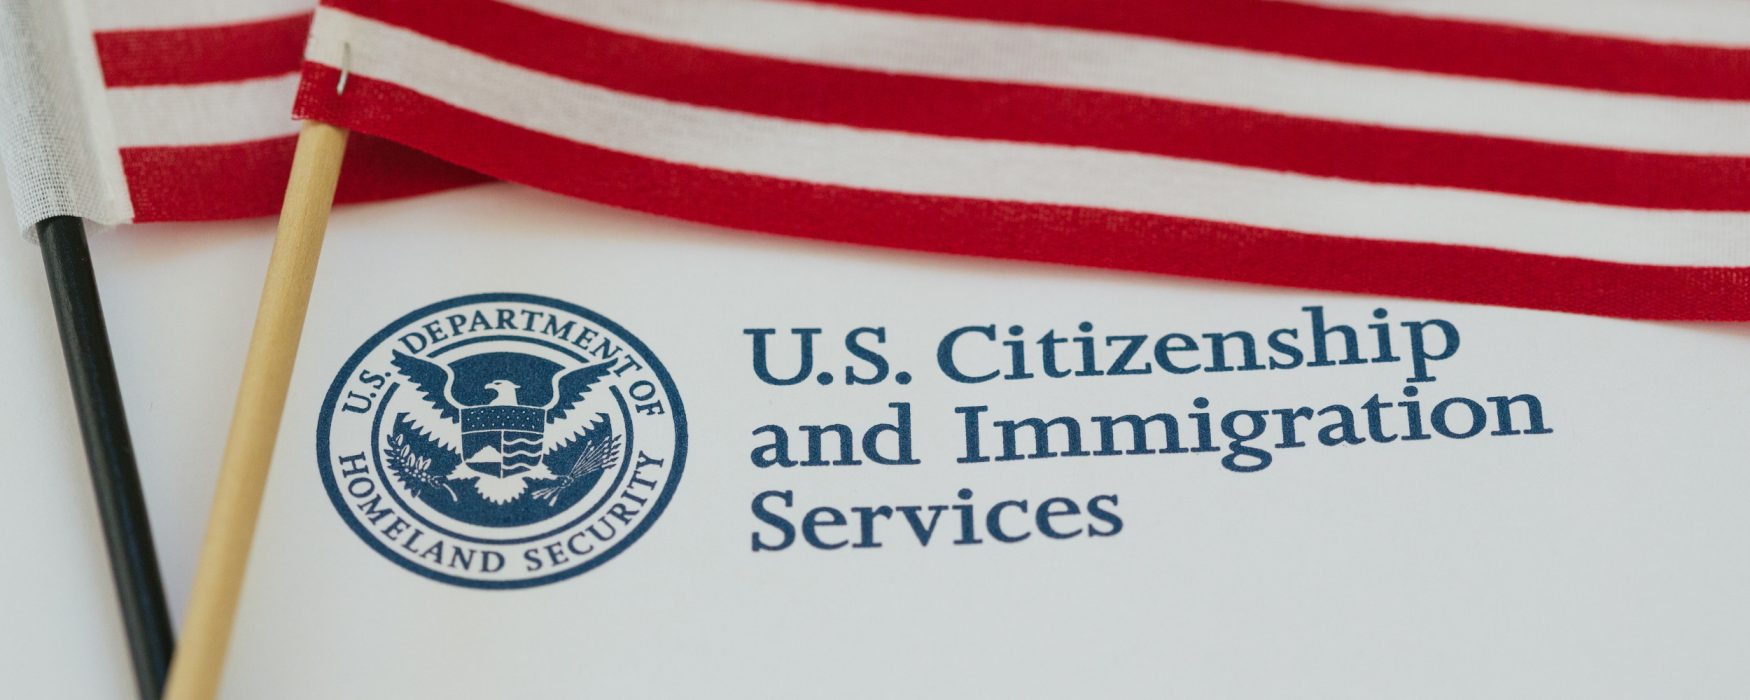 Image of U.S. Citizenship and Immigration Services logo